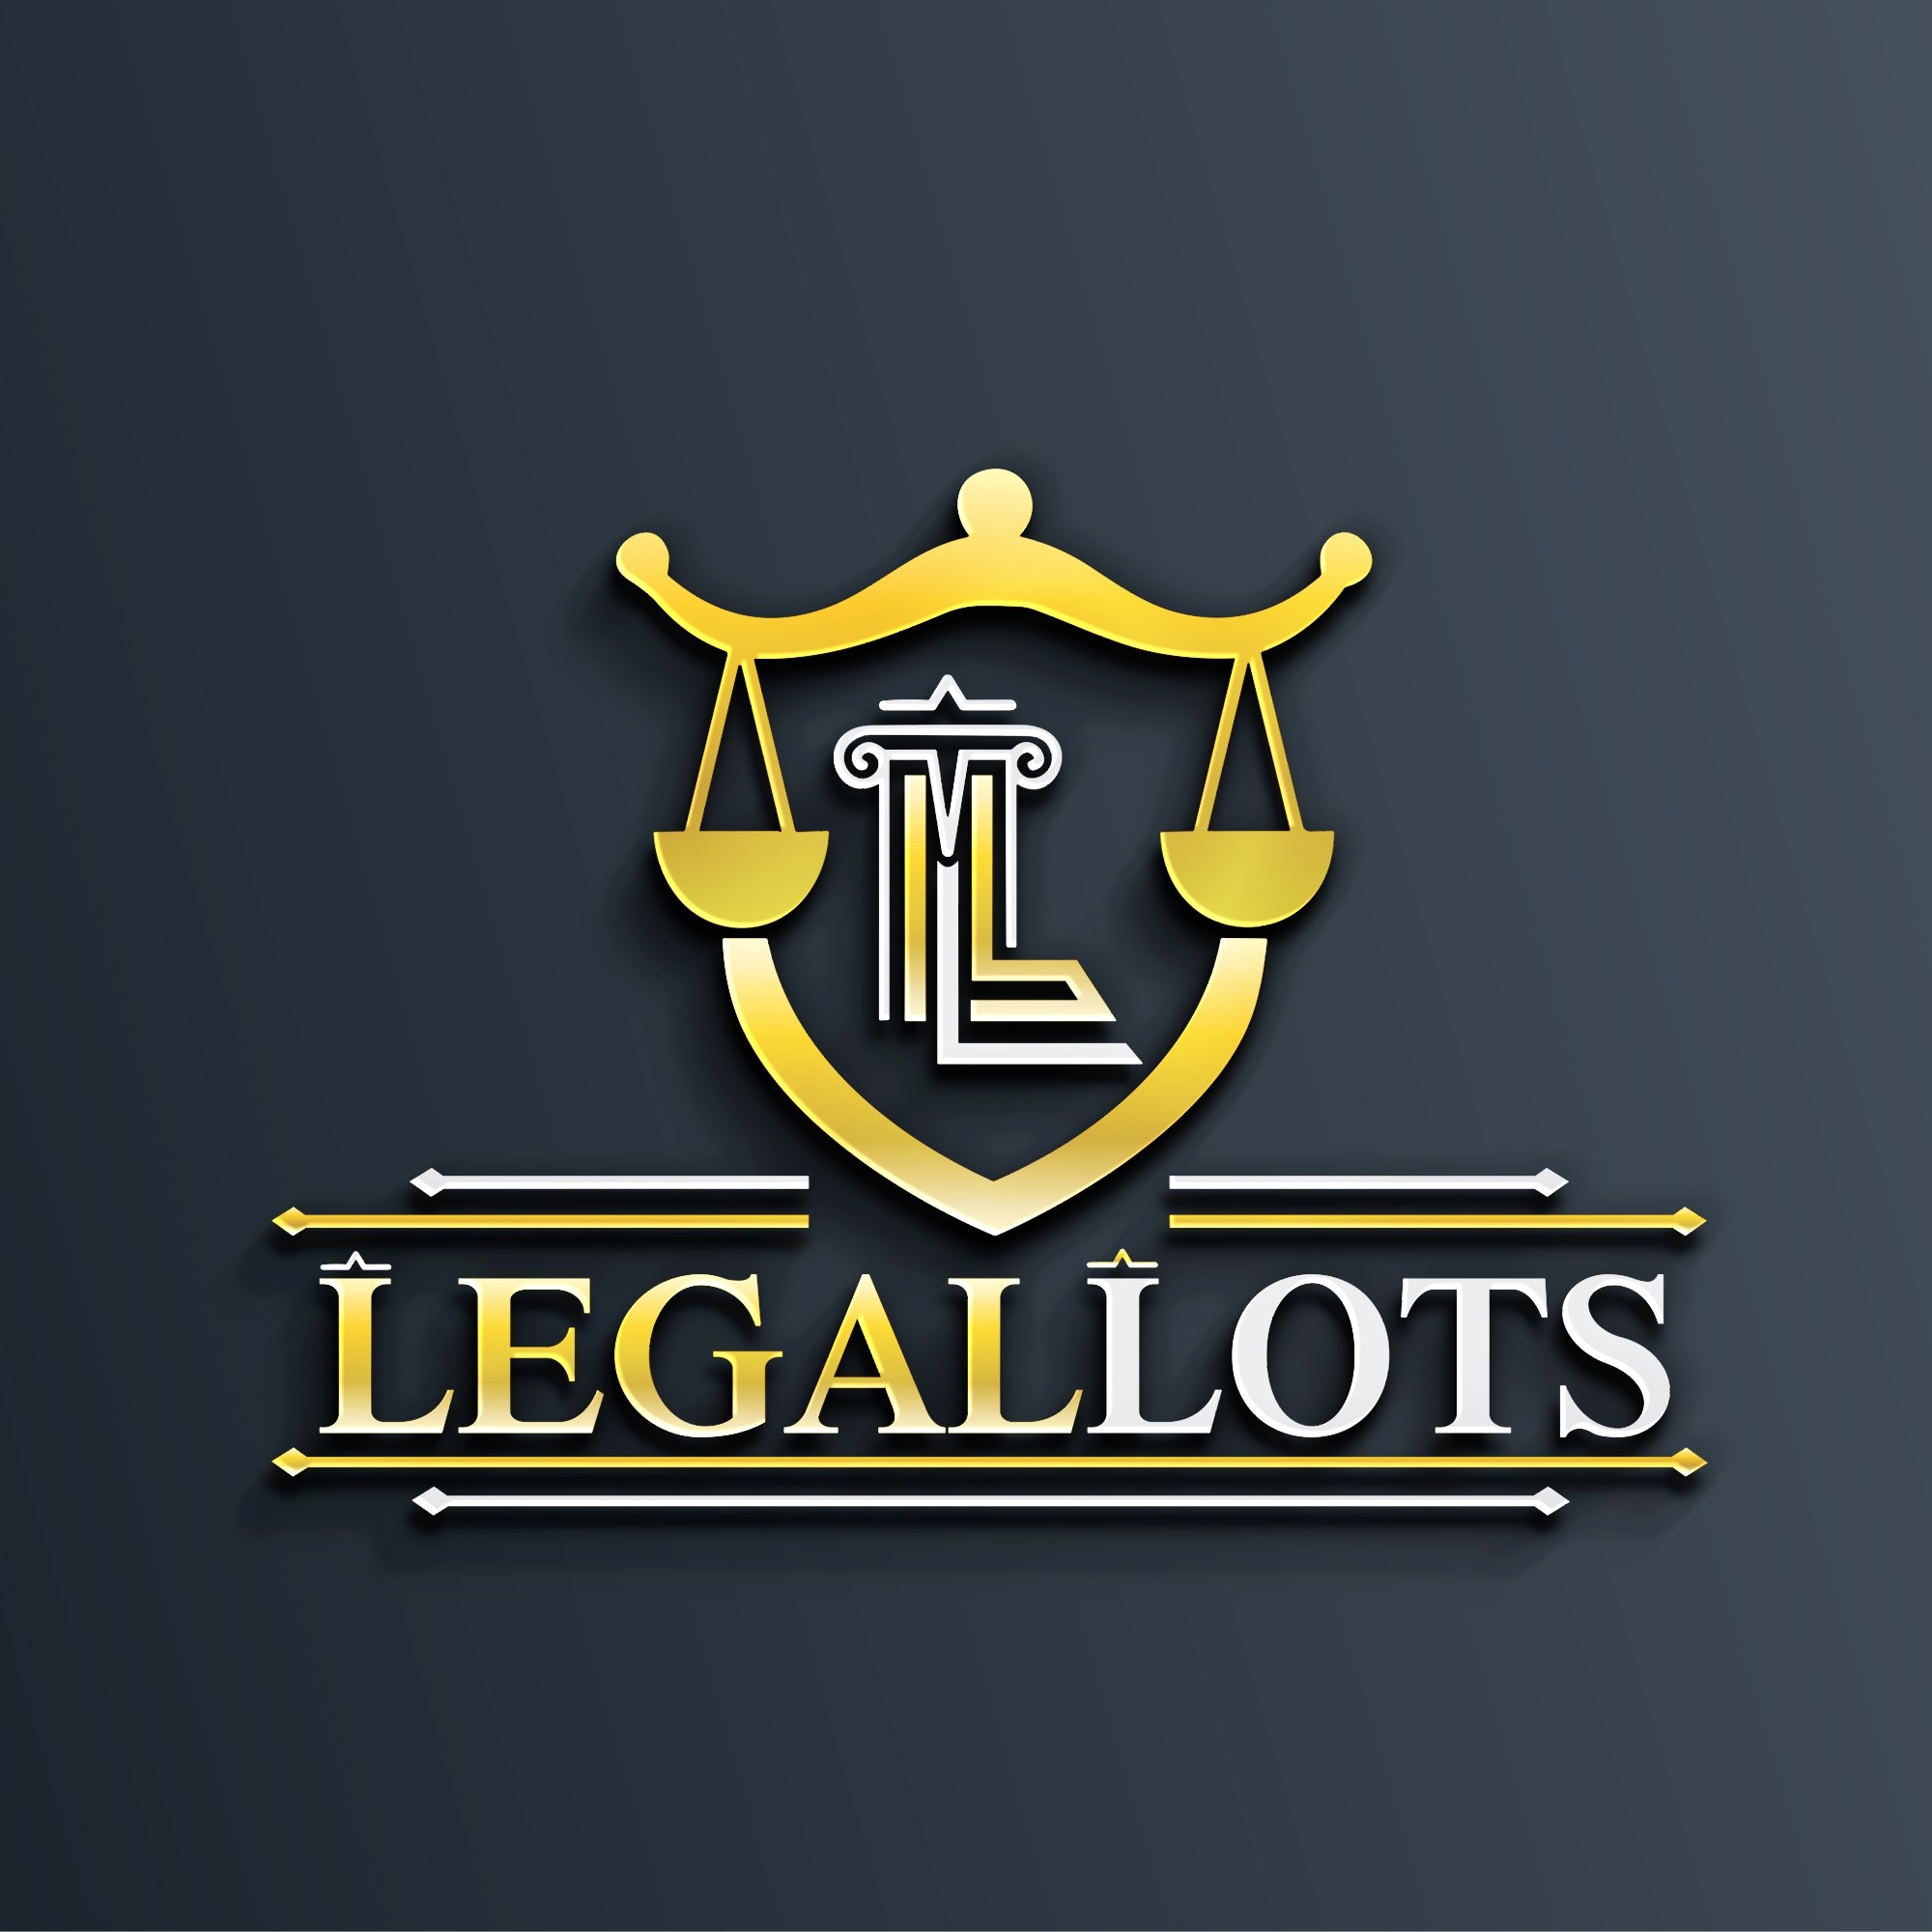 LegalLots Law Firm |Accounting Services|Professional Services